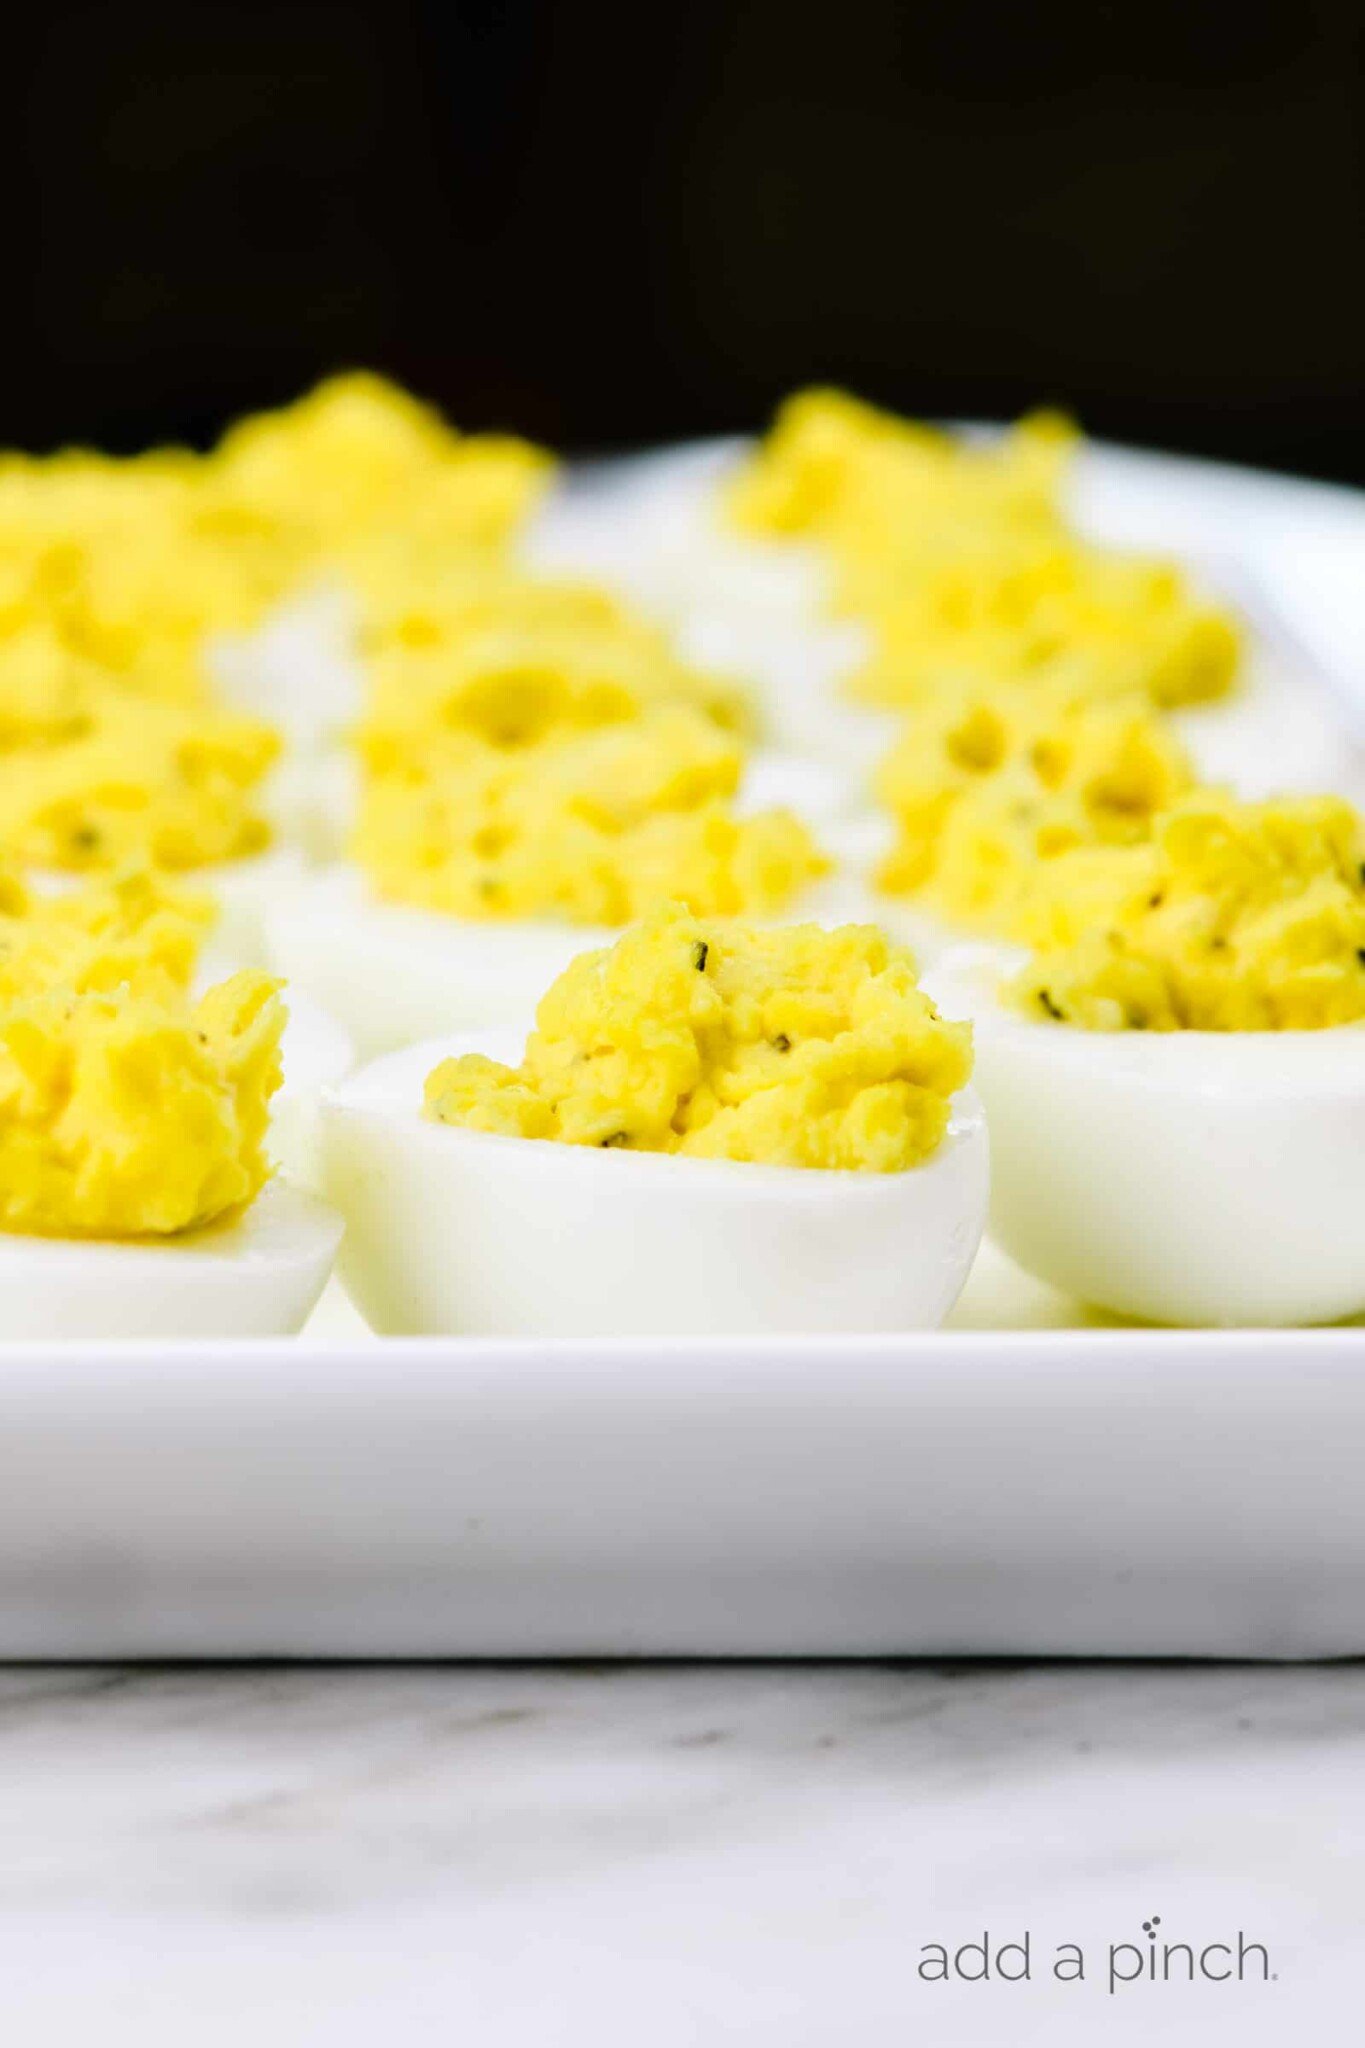 Deviled Egg Sandwiches - My Gorgeous Recipes